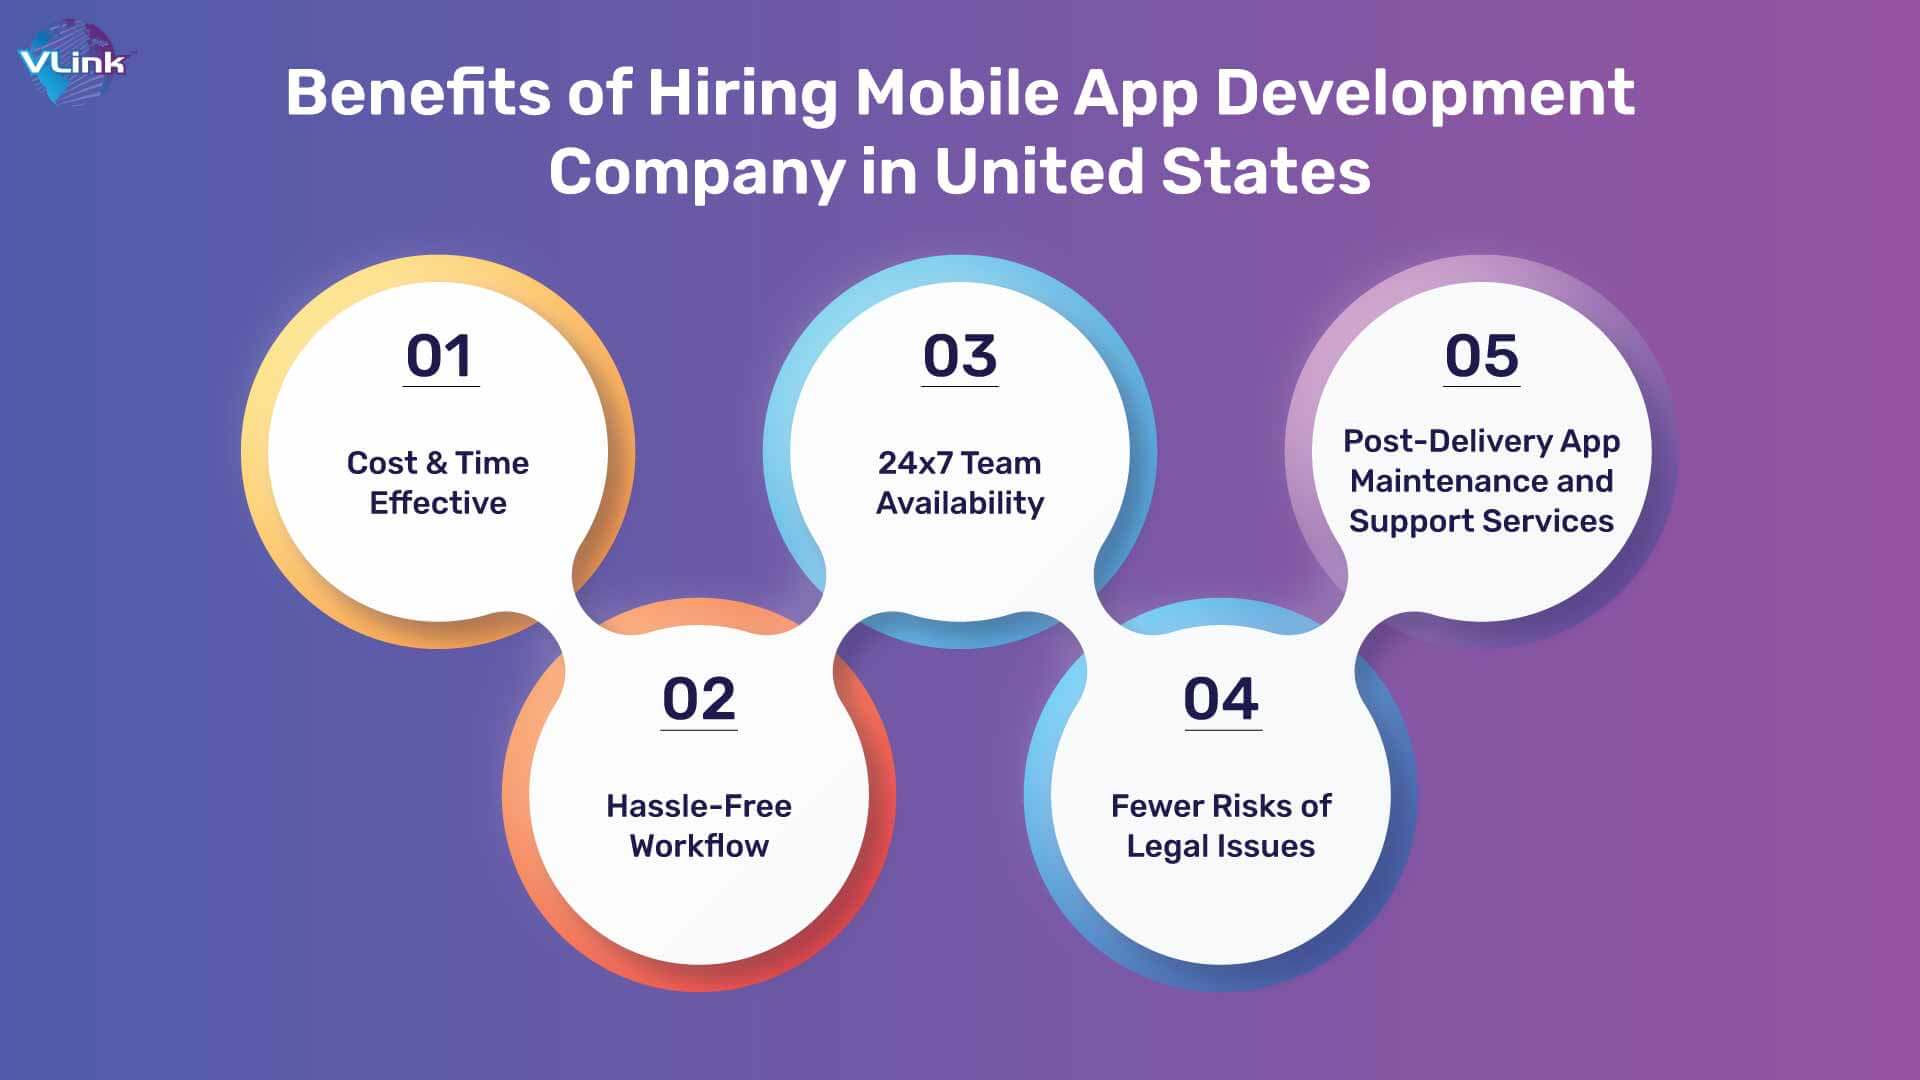 Benefits of Hiring a Mobile App Development Company in the United States?